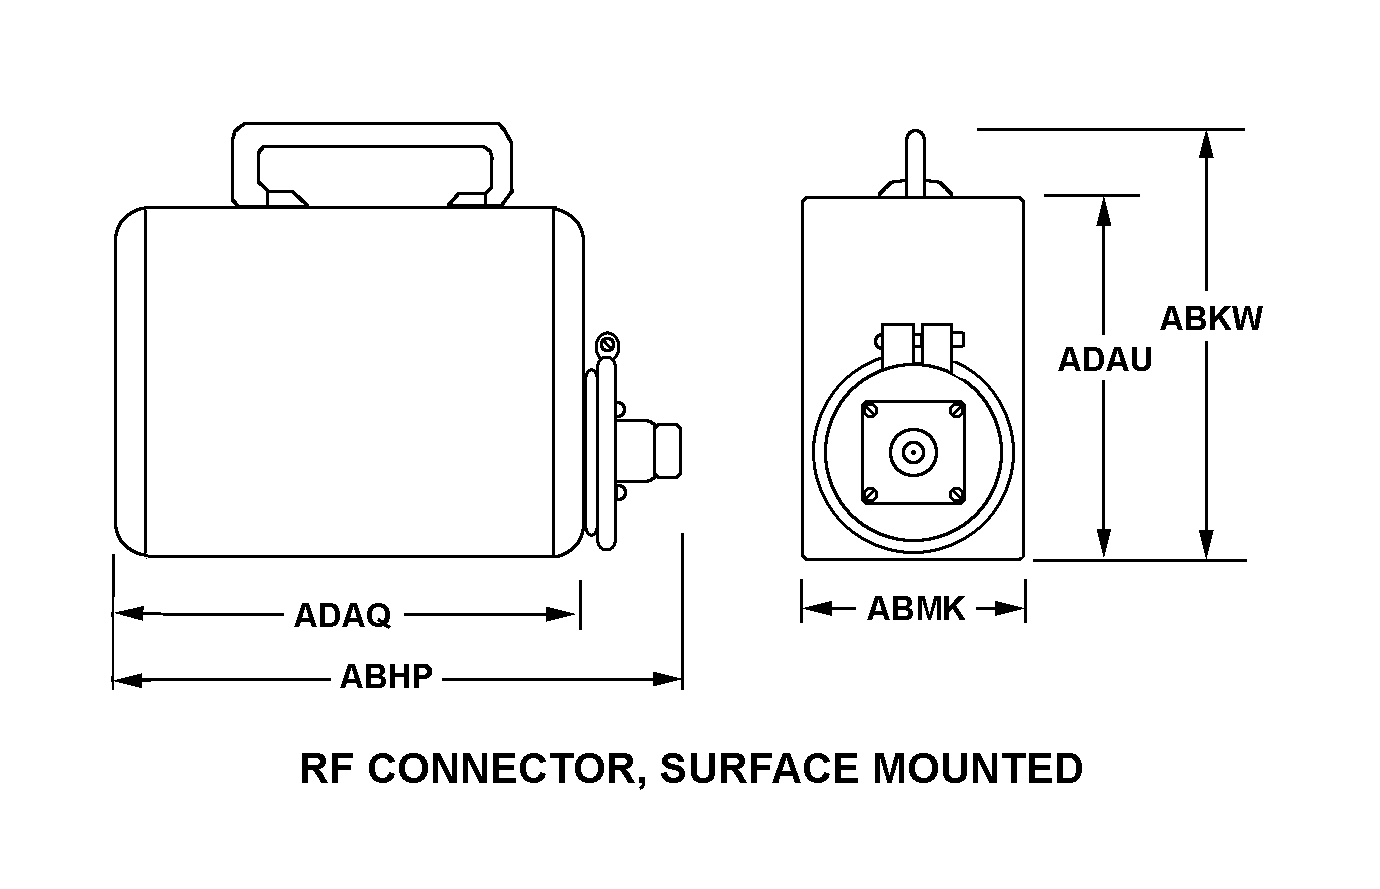 RF CONNECTOR, SURFACE MOUNTED style nsn 5985-00-772-2592